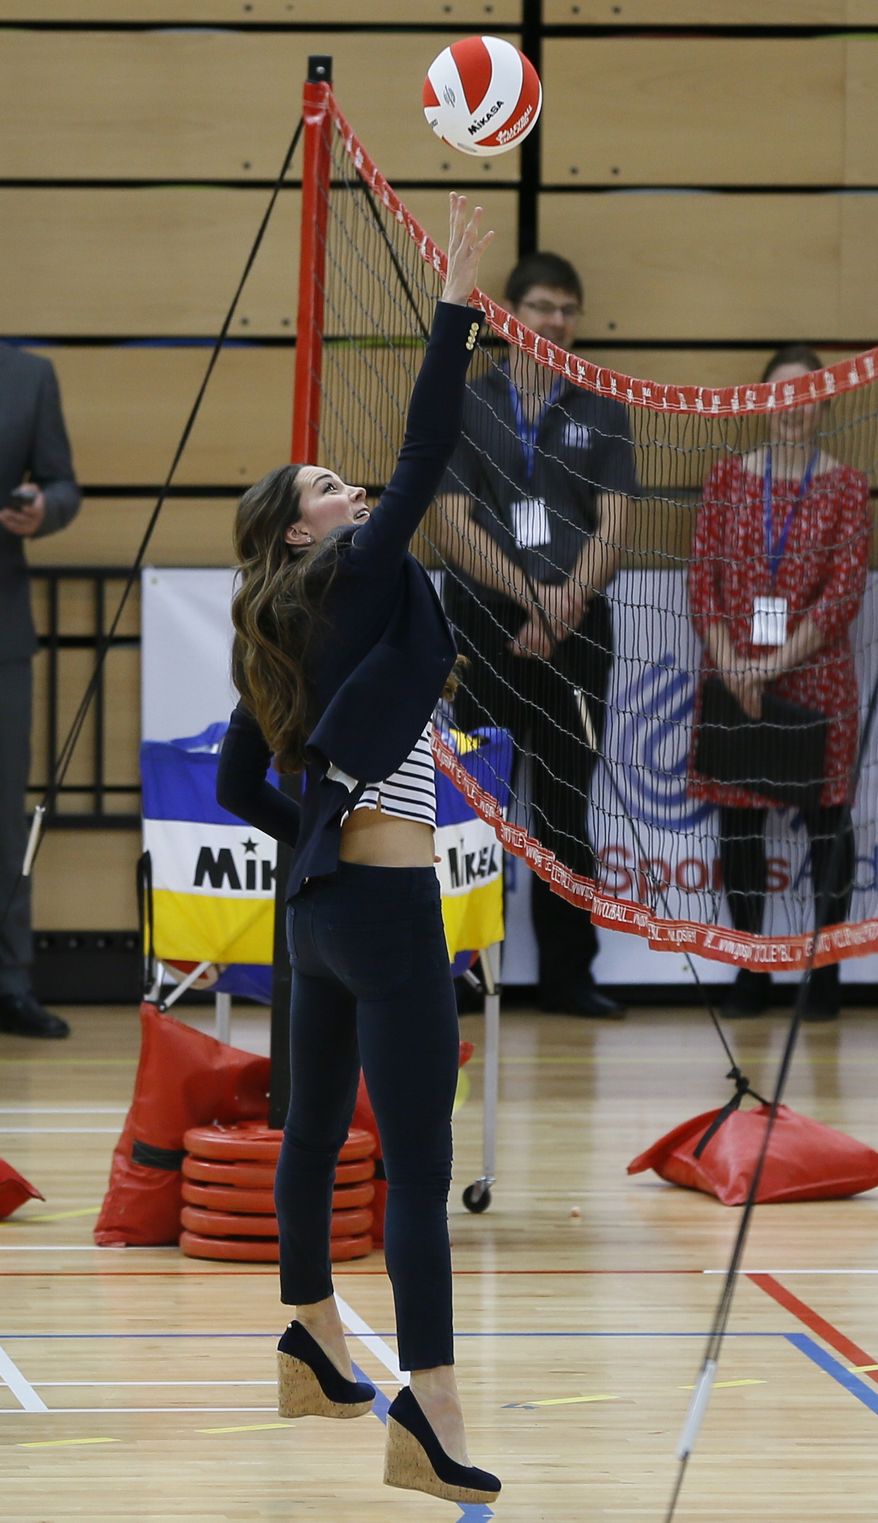 Britain&#39;s Kate, The Duchess of Cambridge plays volleyball during a visit to a SportsAid Athlete Workshop, at the Queen Elizabeth Olympic Park in London, Friday, Oct. 18, 2013. The Duchess of Cambridge as Patron of SportsAid attended a SportsAid Athlete Workshop at the Copper Box where she viewed young athletes taking part in a number of sports activities. (AP Photo/Kirsty Wigglesworth)